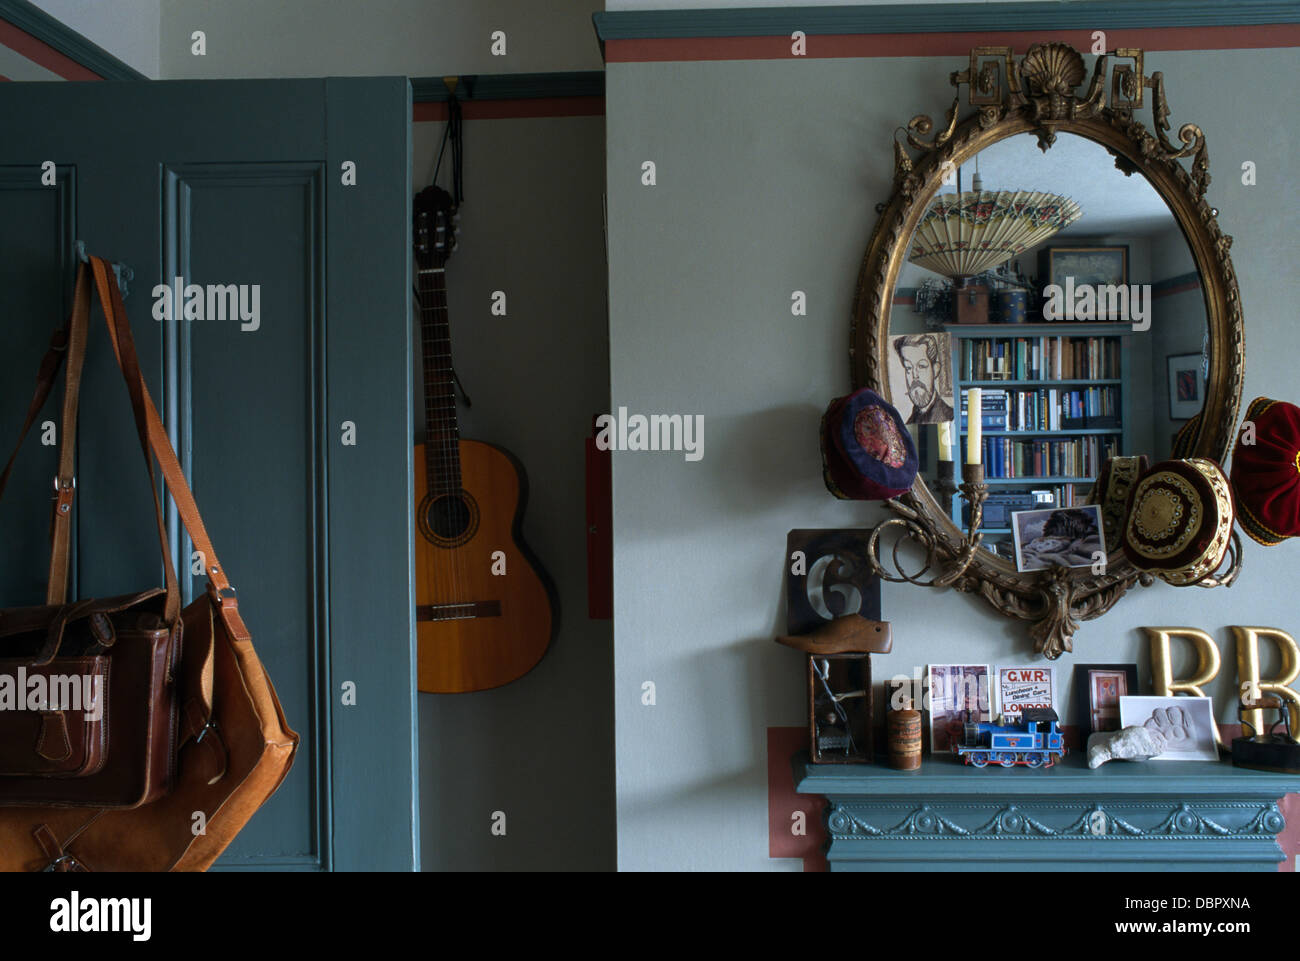 Antique girandole mirror above fireplace in small townhouse bedroom with guitar and old leather satchels hanging on pegs Stock Photo